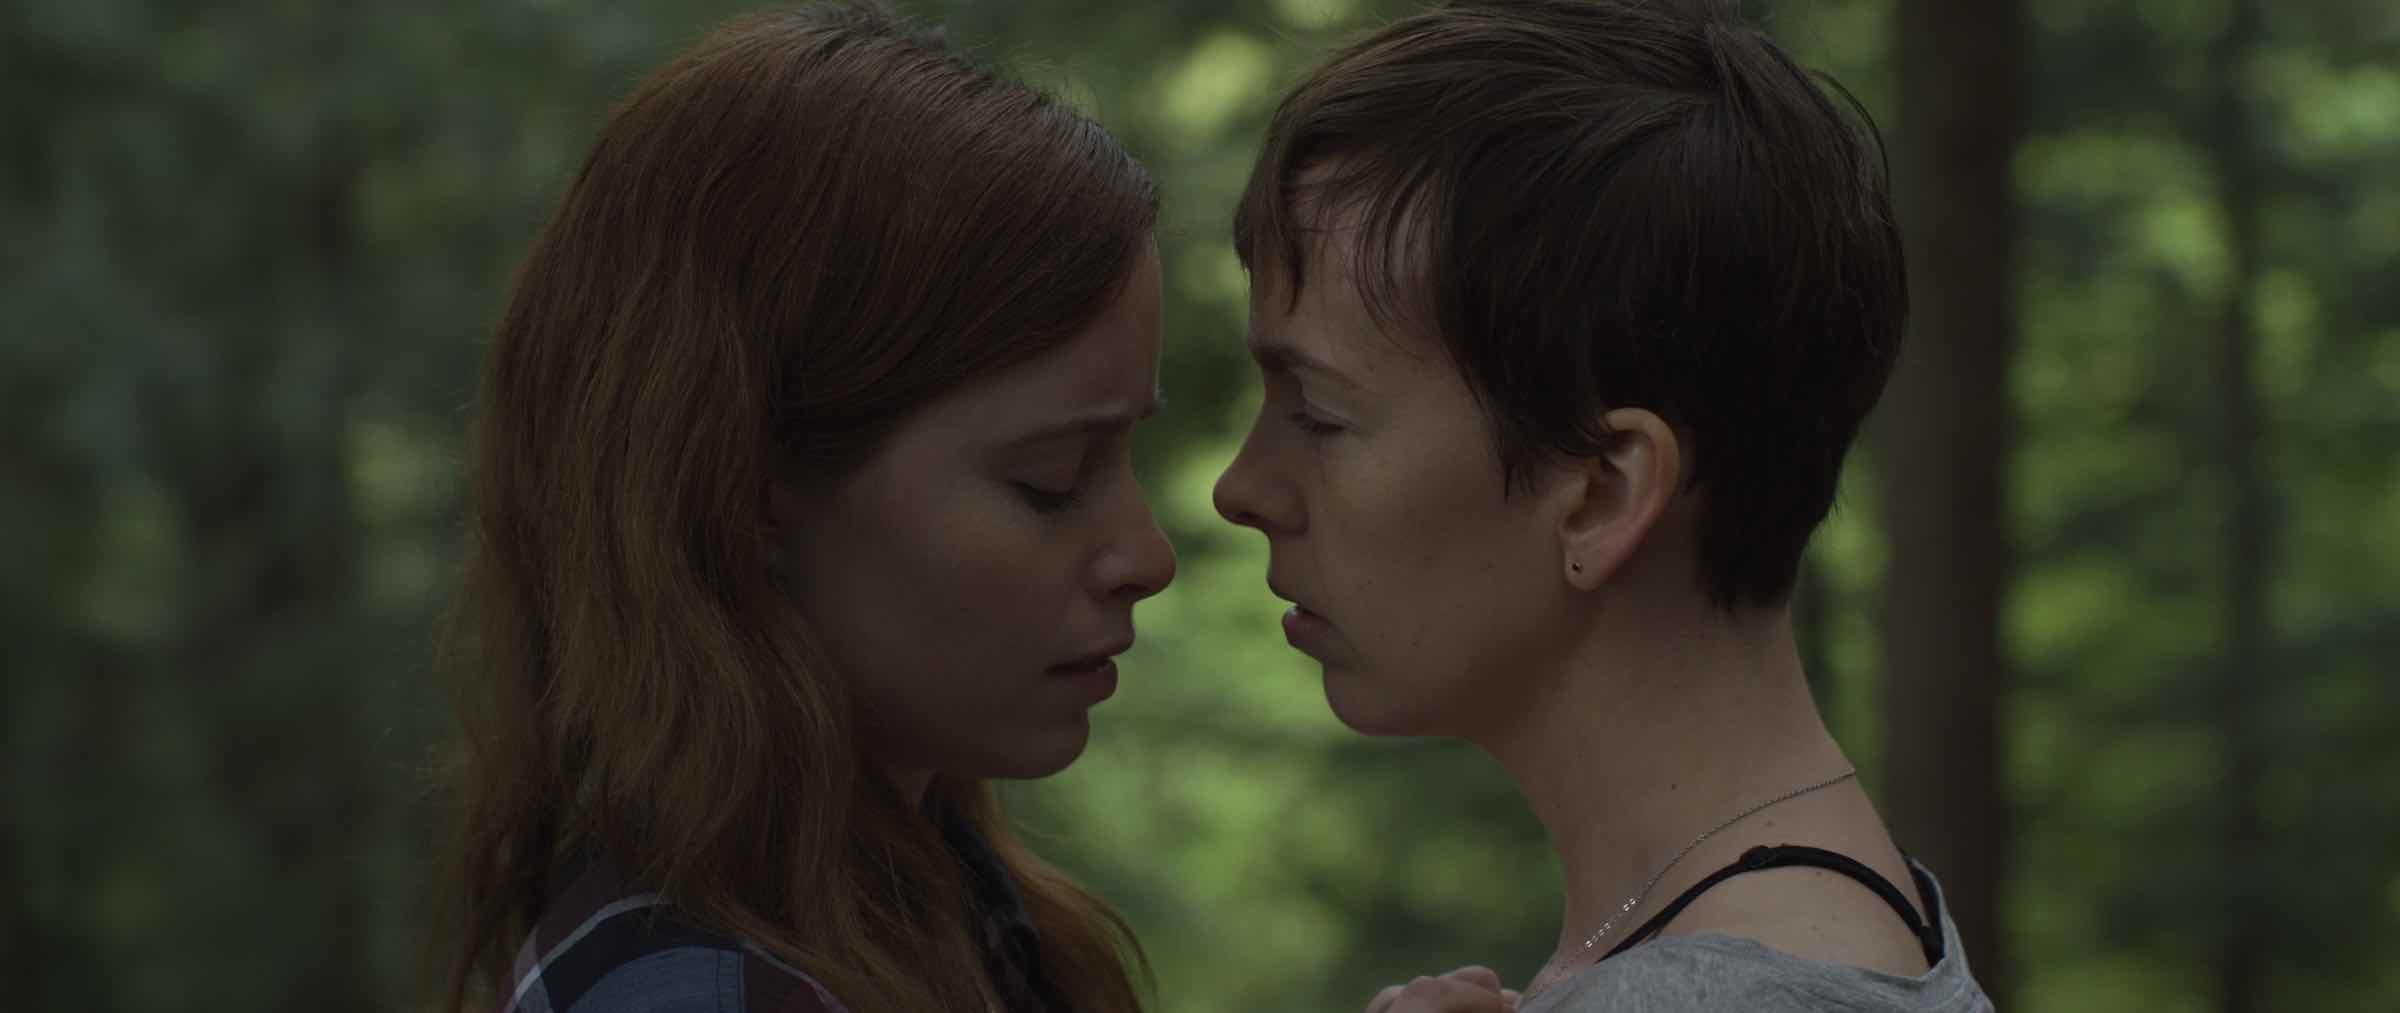 TV's very best depictions of lesbian love relationships Film Daily